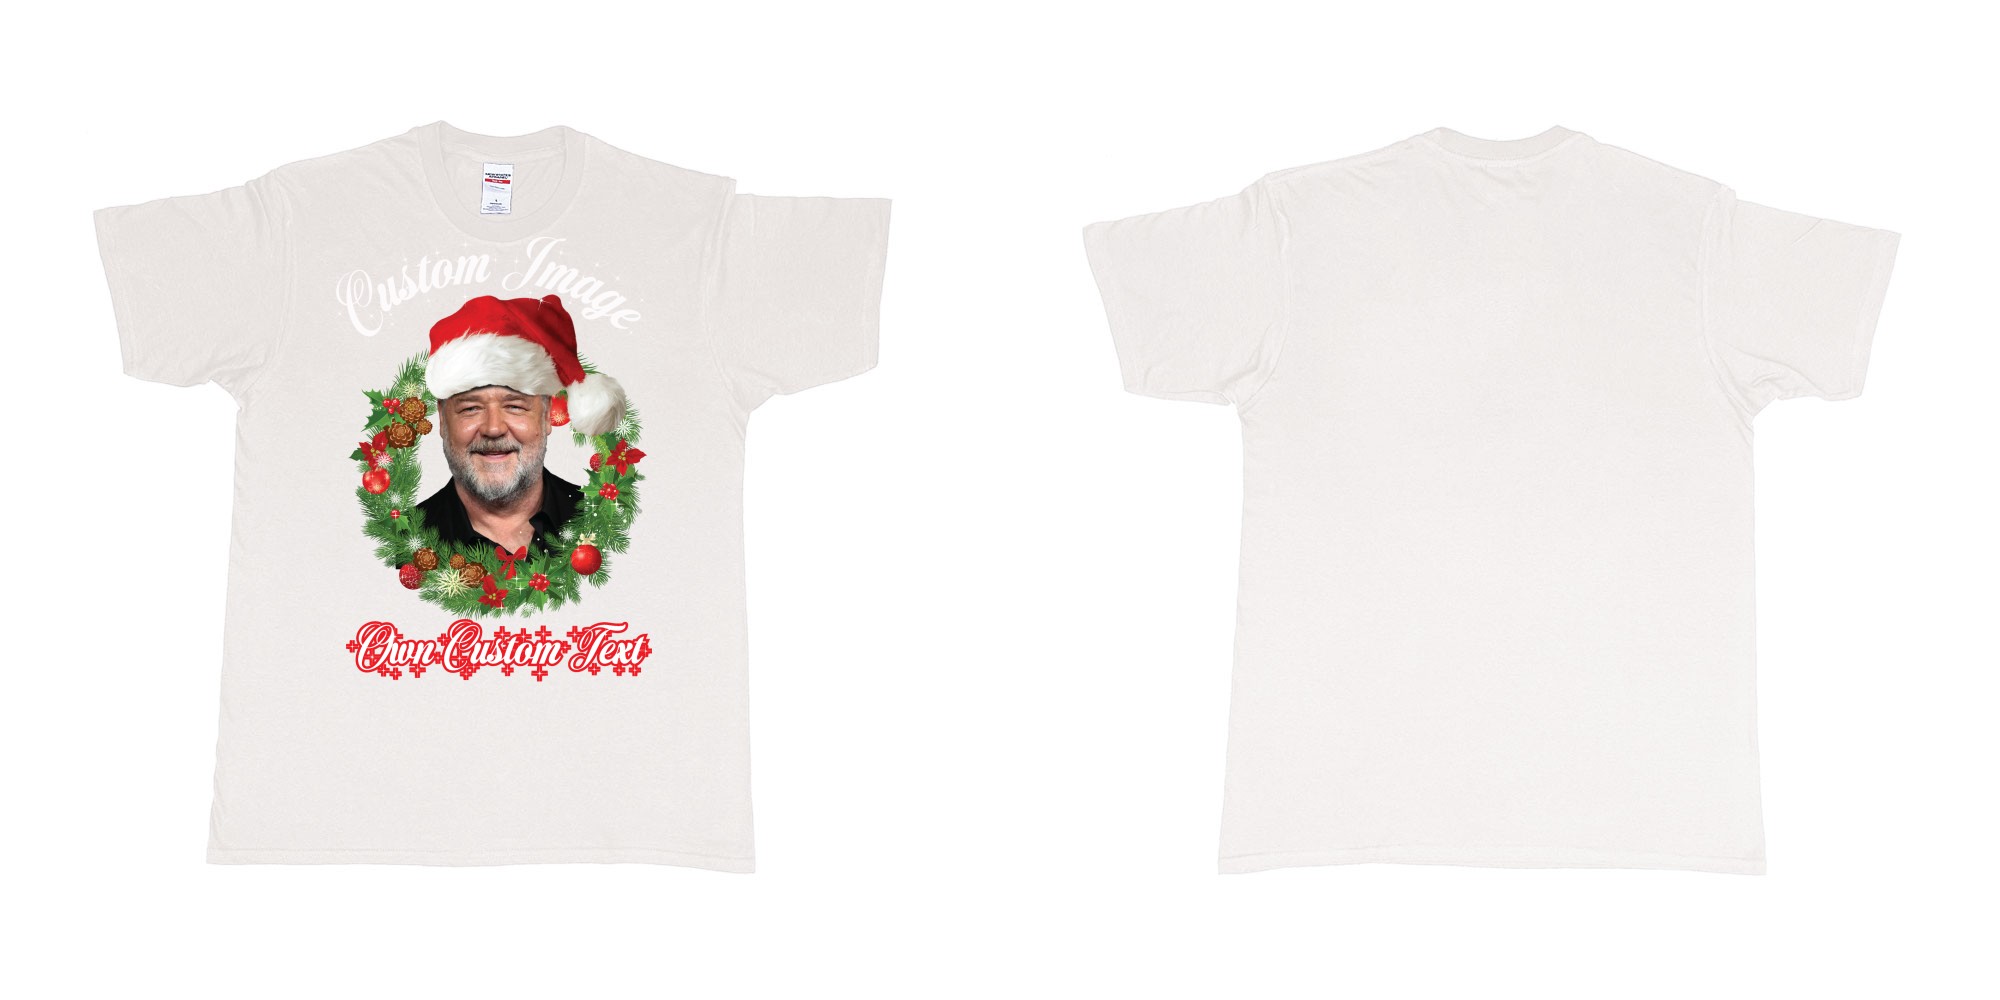 Custom tshirt design christmas wreath custom face image text in fabric color white choice your own text made in Bali by The Pirate Way